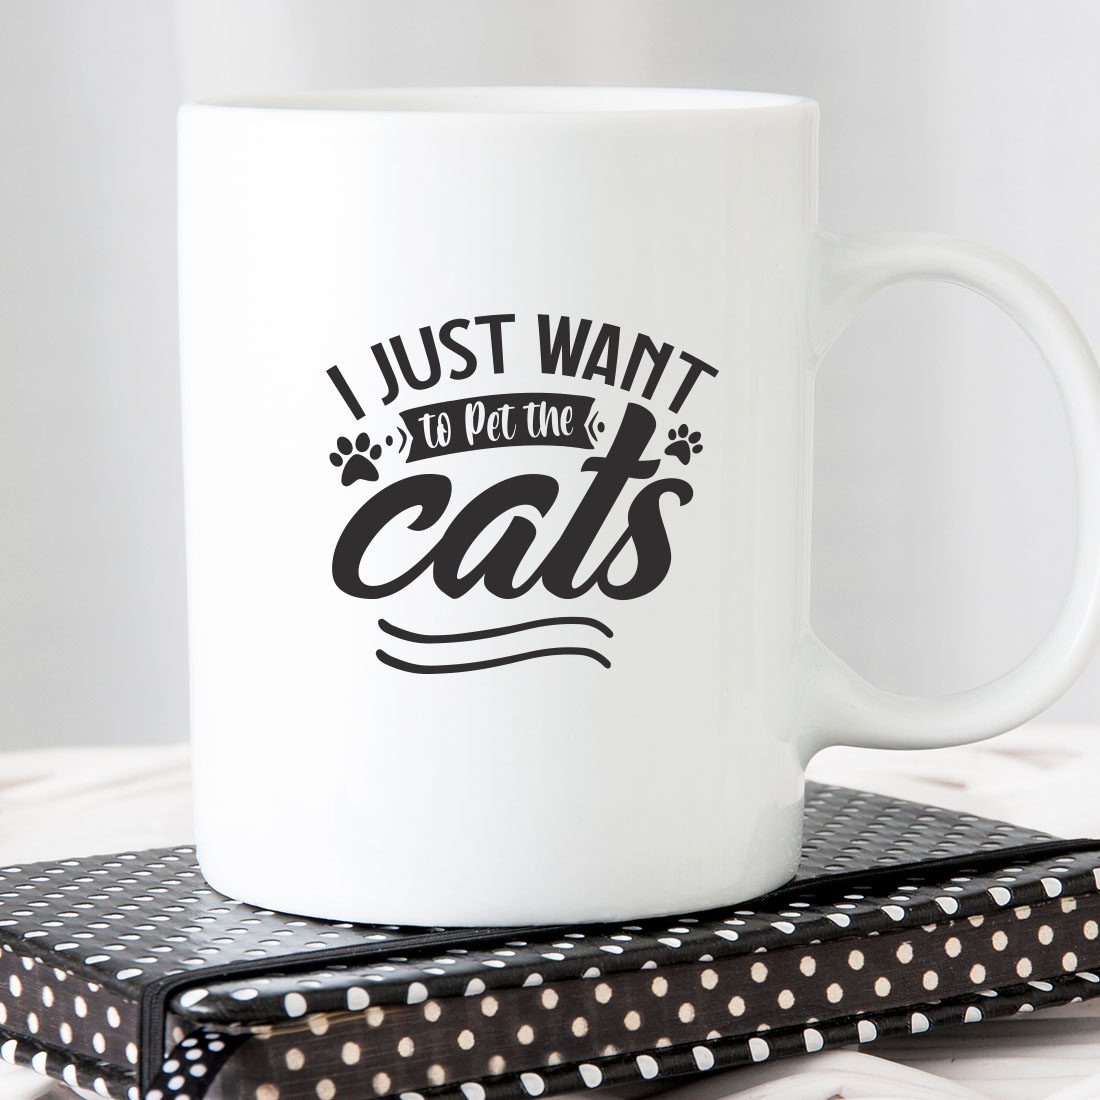 White coffee mug that says i just want to pet the cats.